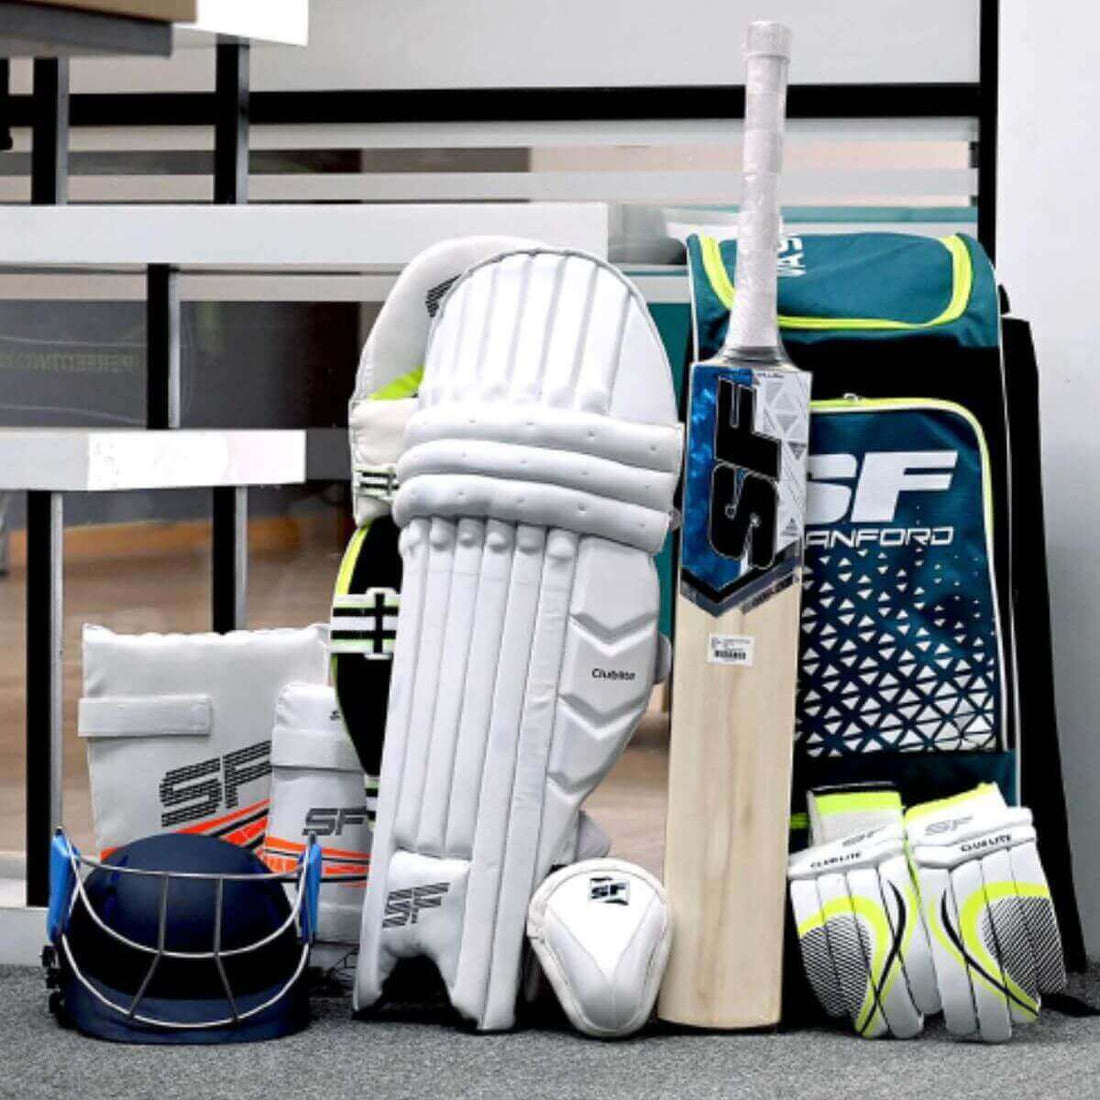 Why Using Proper Gear in Cricket is Essential for Performance